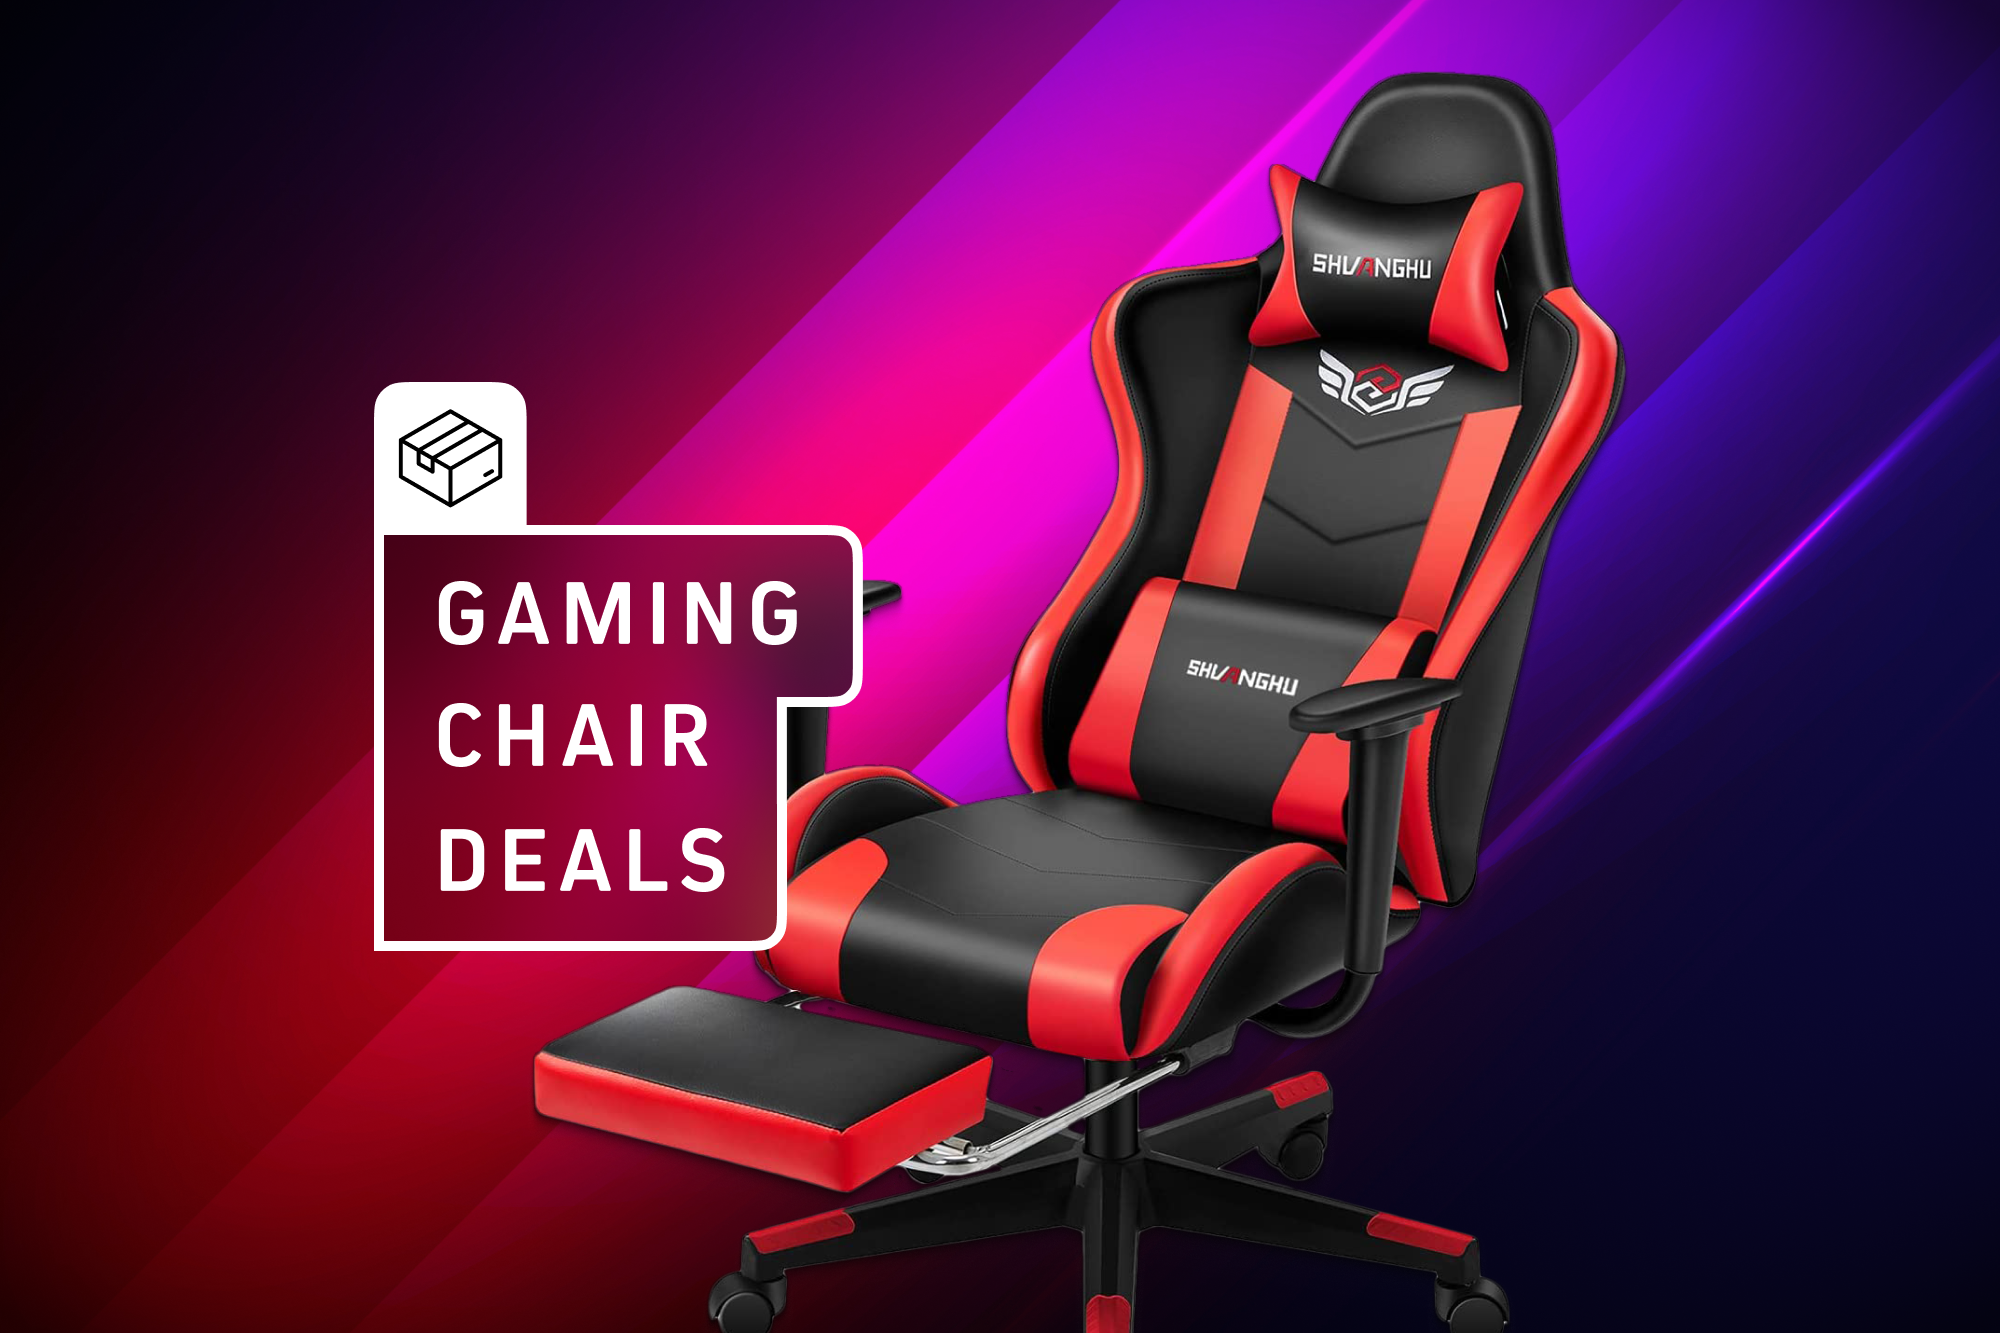 Best Gaming Chairs for Short People- Don't Buy Before Reading This